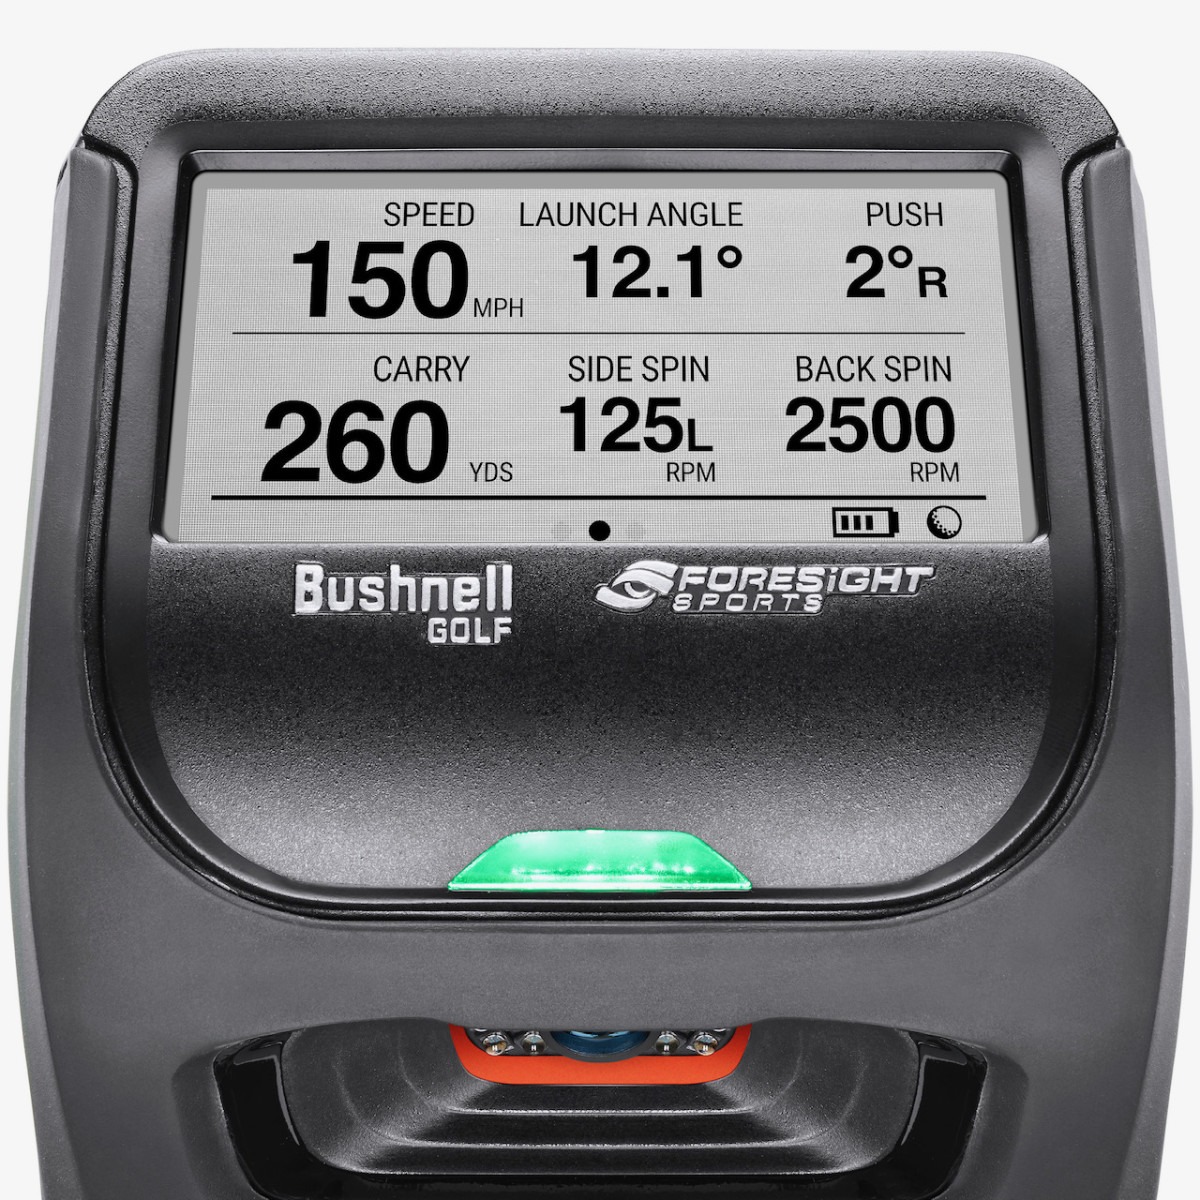 The screen of the Bushnell Golf Launch Pro monitor